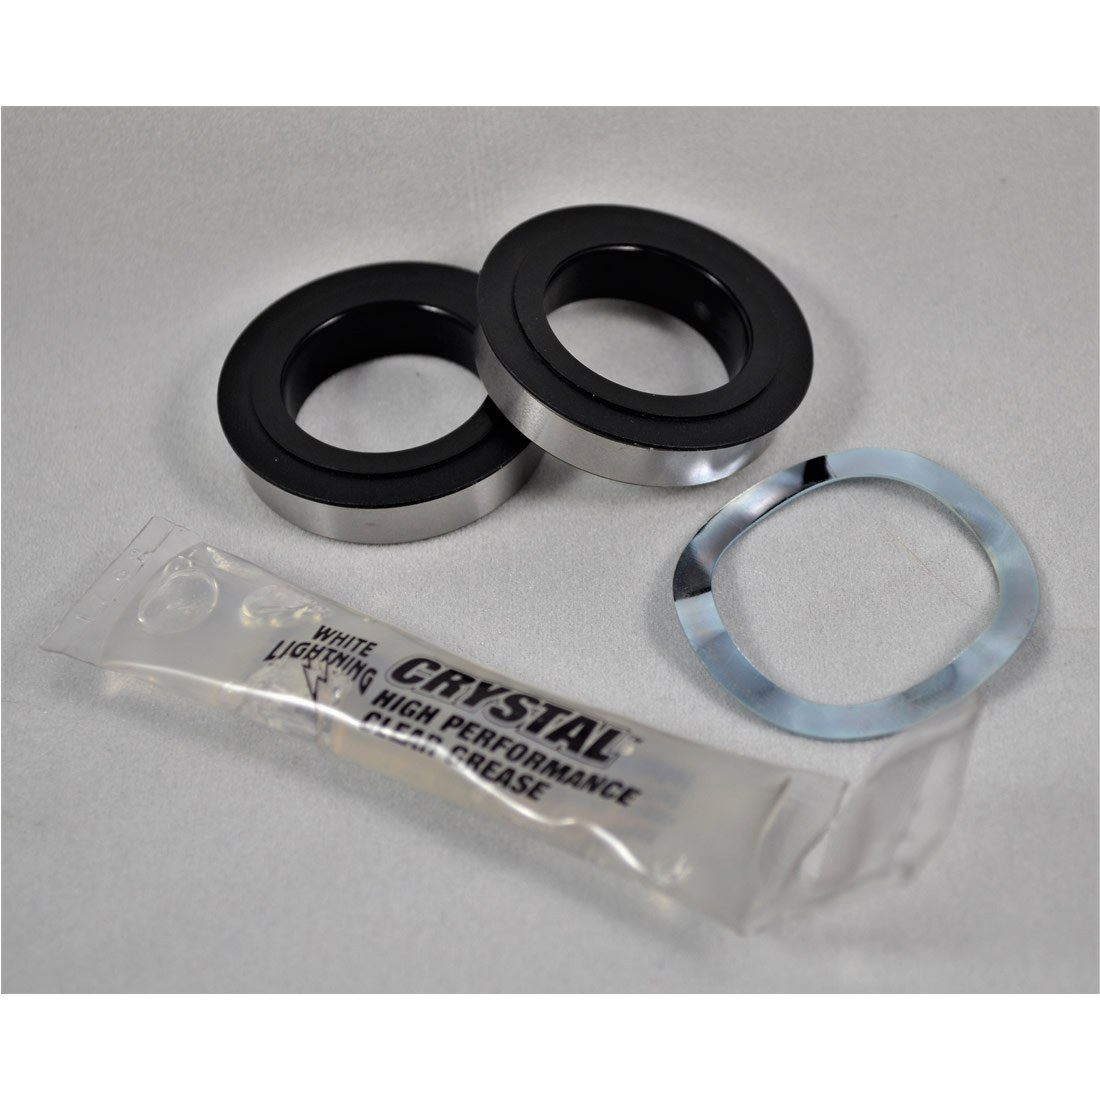 What is the Difference Between Standard, FSS, and FSS+CX Seal Hawk Racing Bearings?